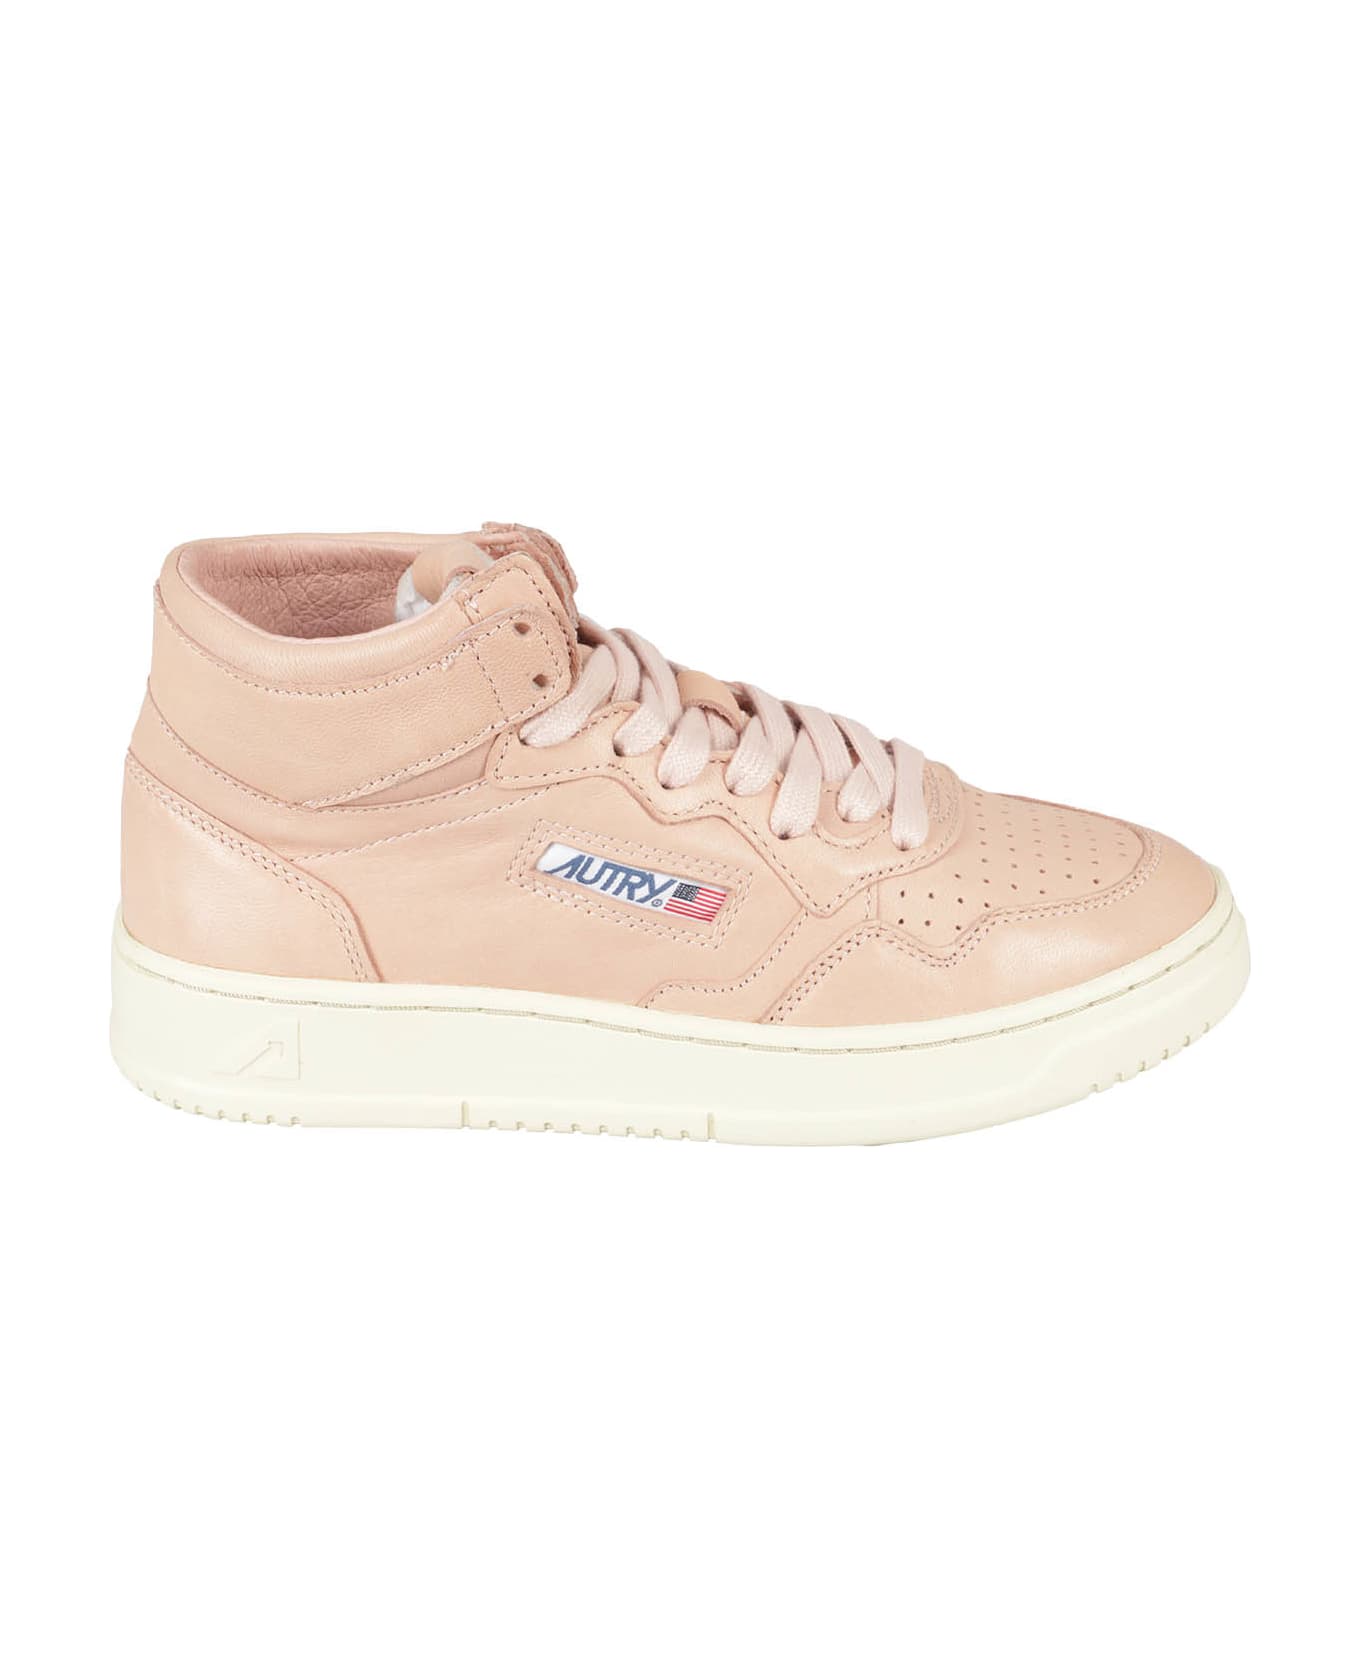 Autry Medalist Mid Sneakers - Goat Peach